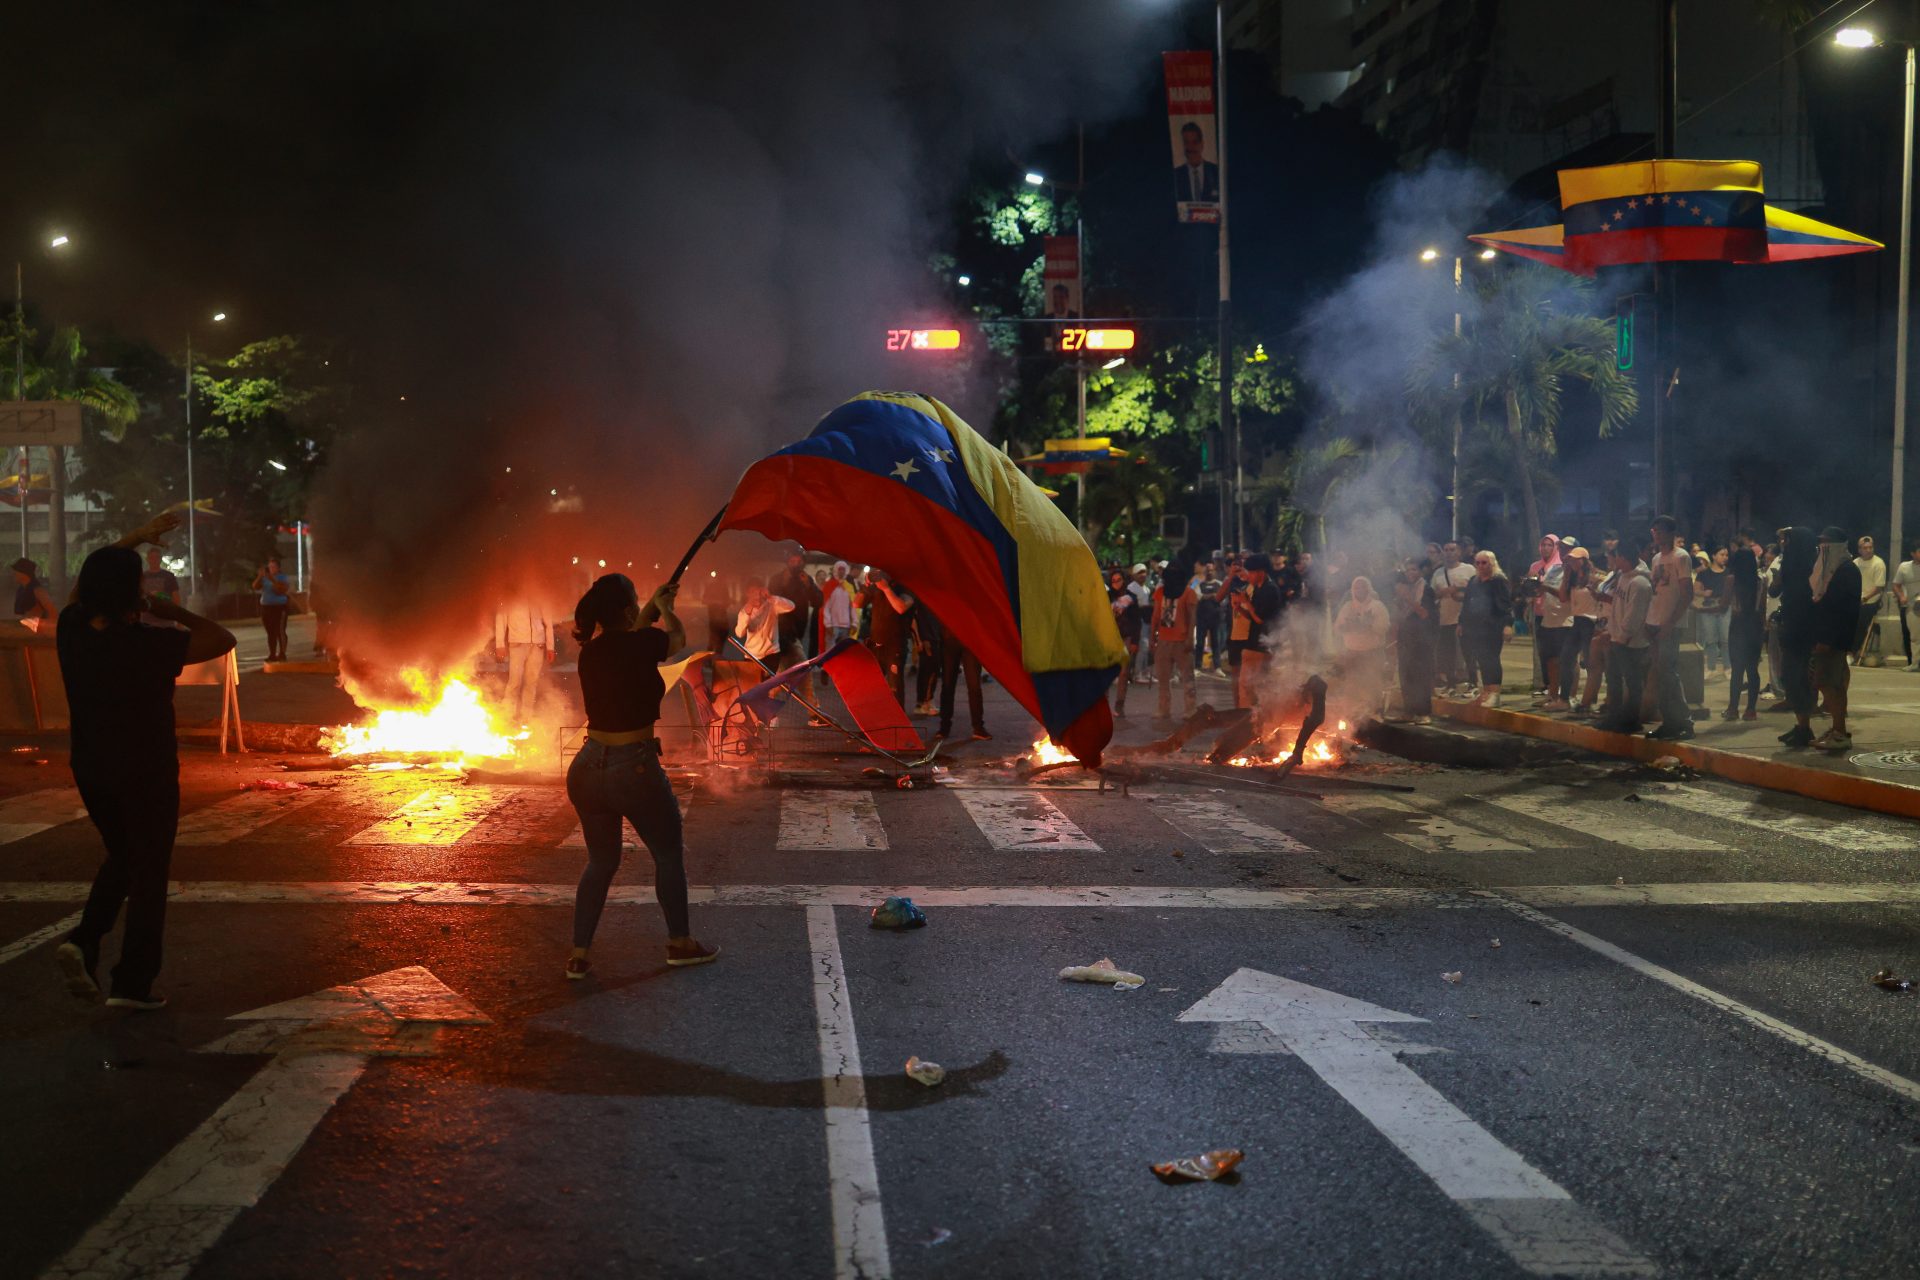 Venezuelans hit the streets to protest Maduro's apparent fraud